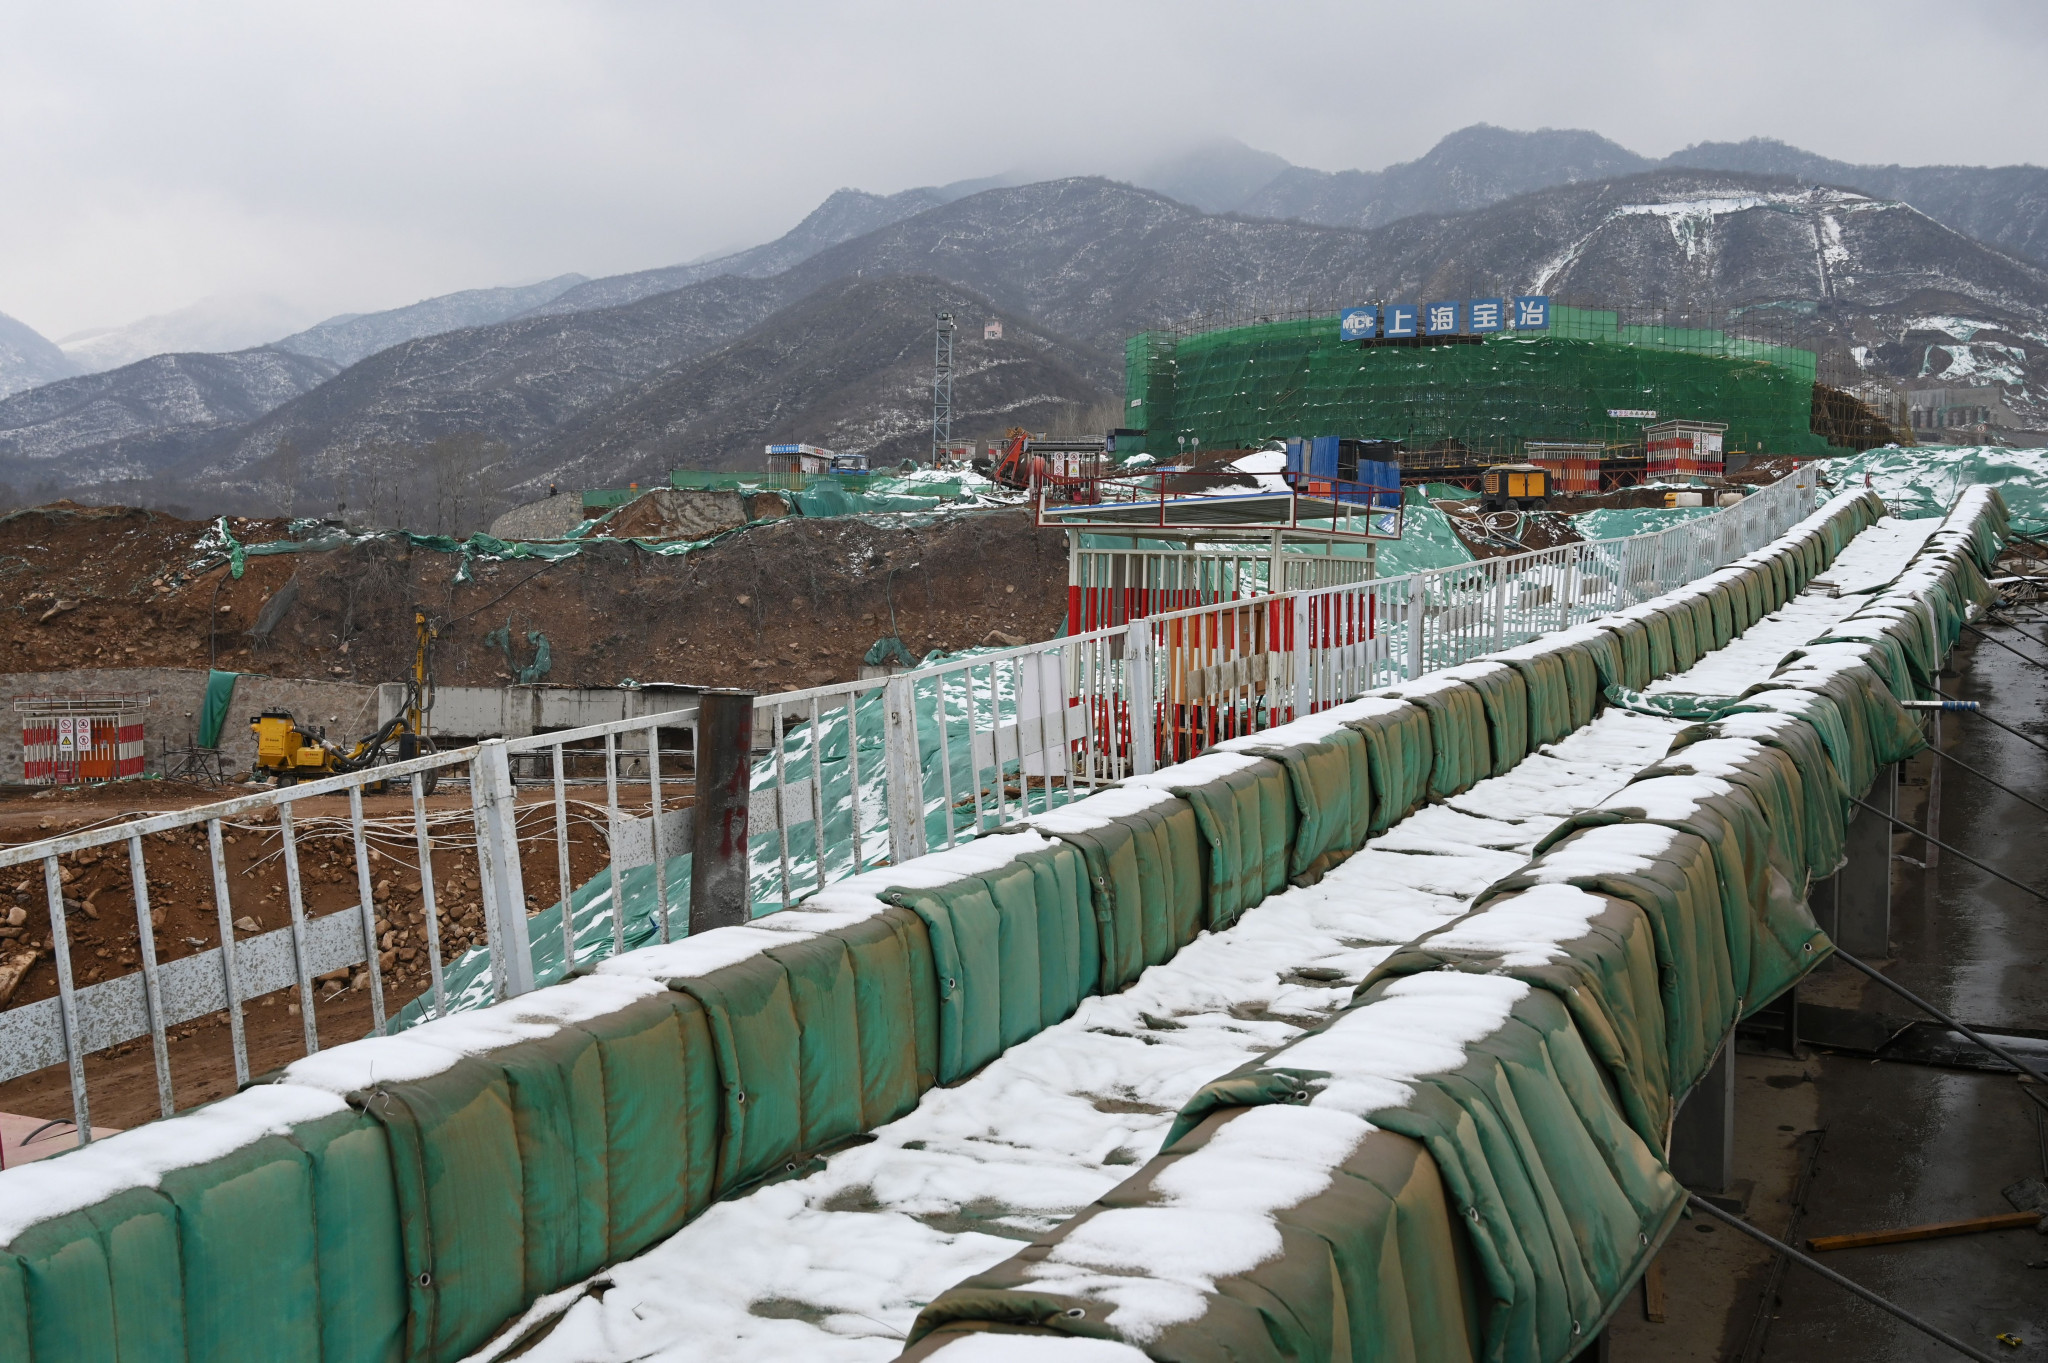 The Xiaohaituo Bobsleigh, Skeleton and Luge Track is scheduled to be ready for testing in June 2020 ©Getty Images